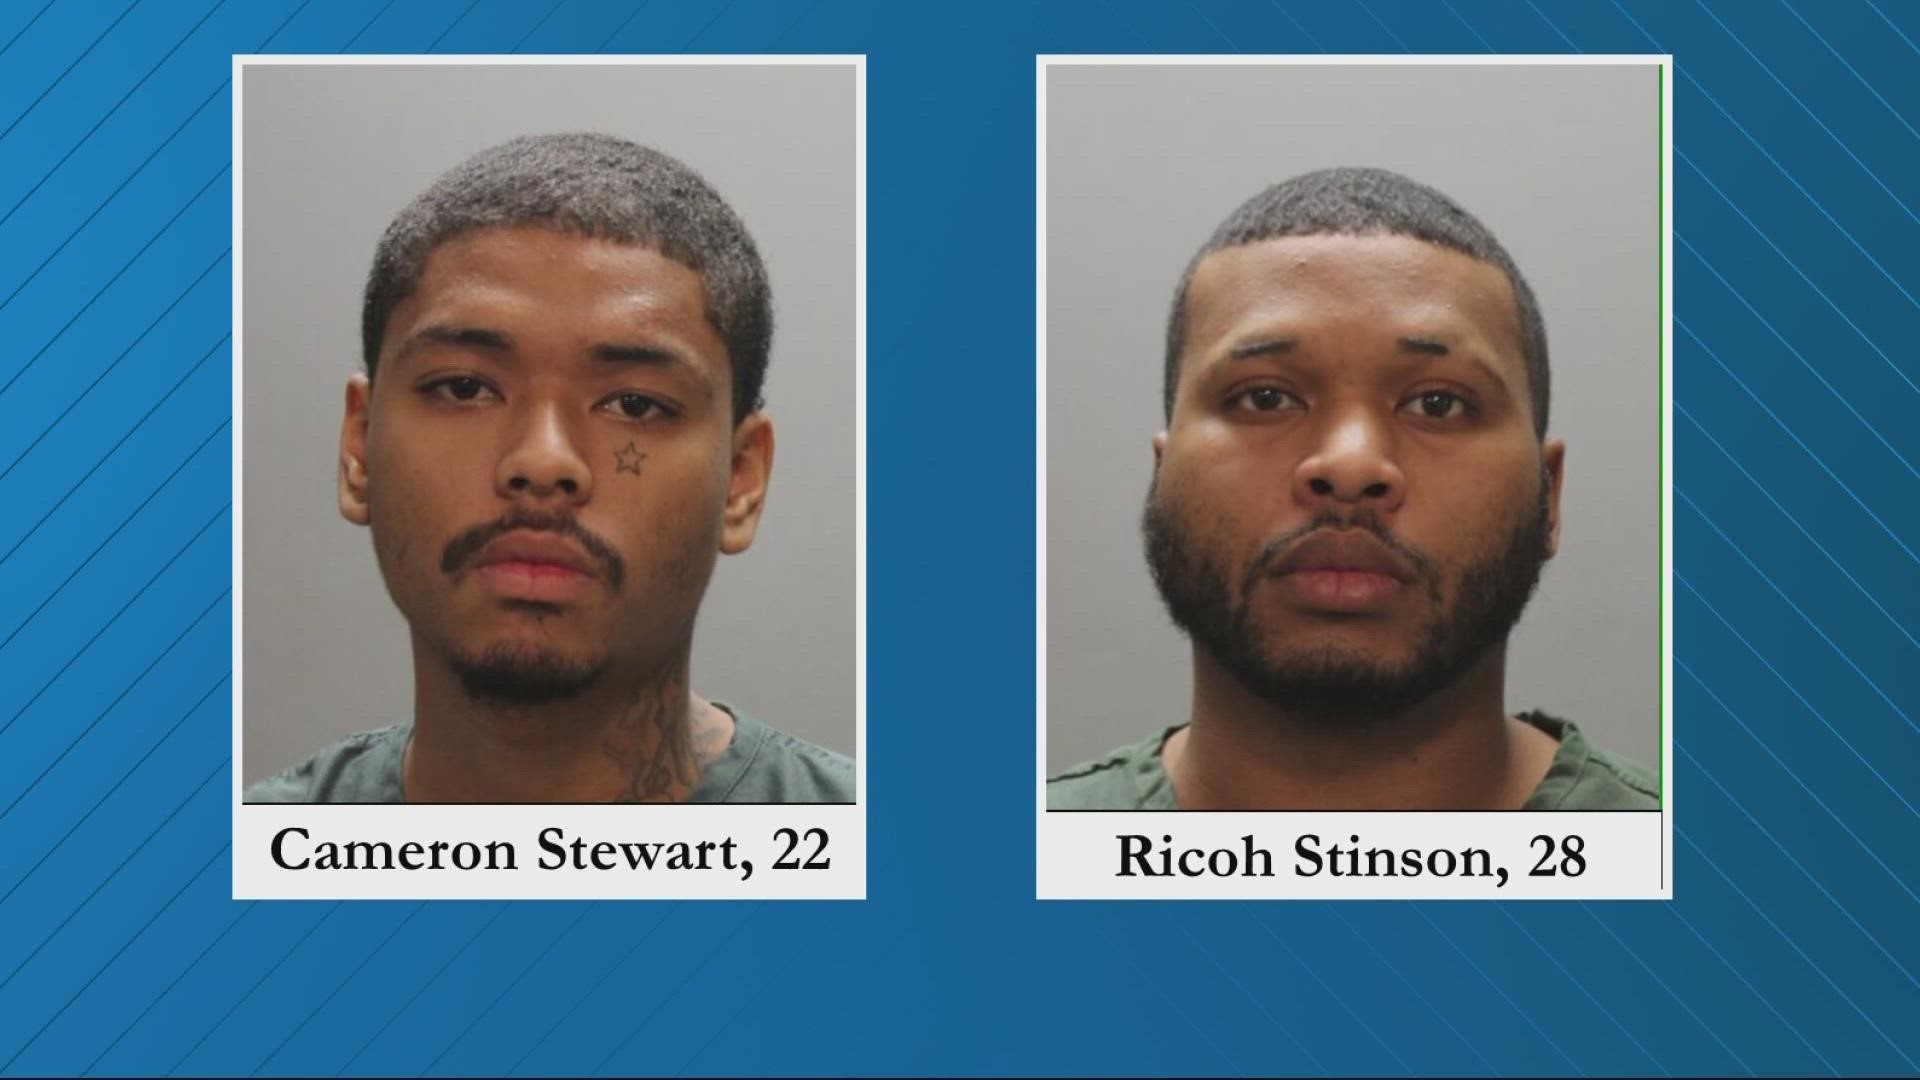 Two men accused in a Jacksonville murder were found in New Orleans, according to the Jacksonville Sheriff's Office.